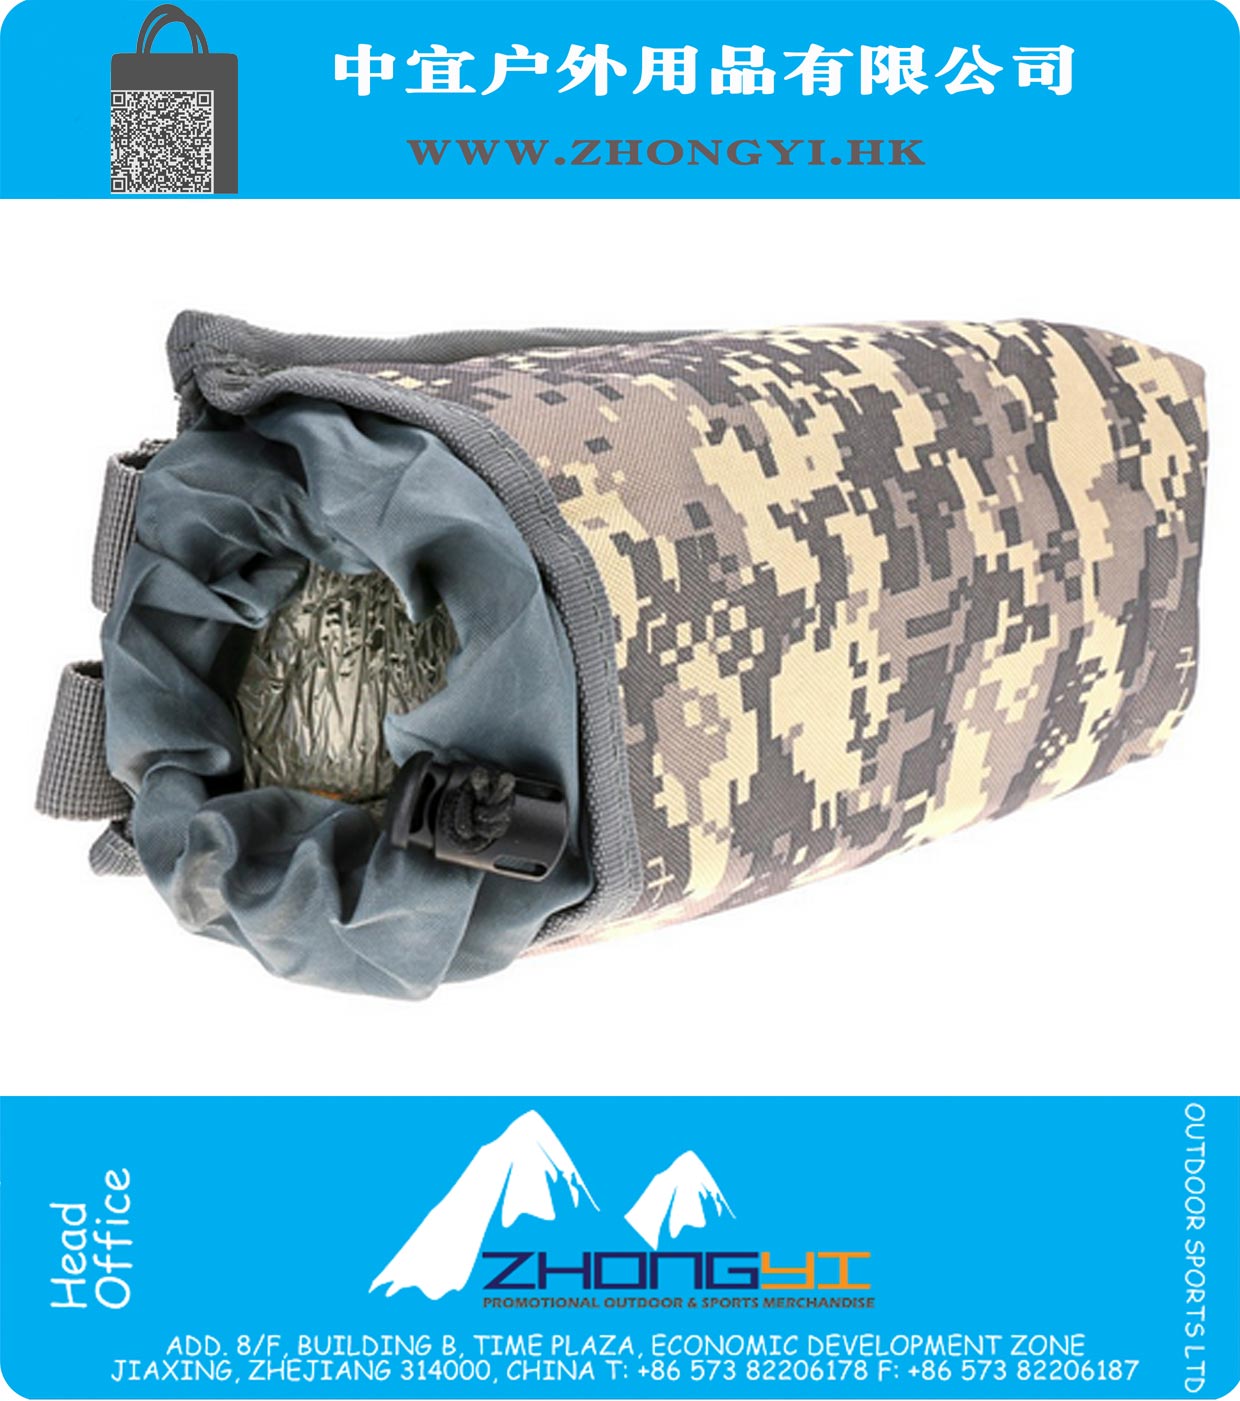 Molle Modular Insulated Heat Cold Water Kettle Bag Pouch